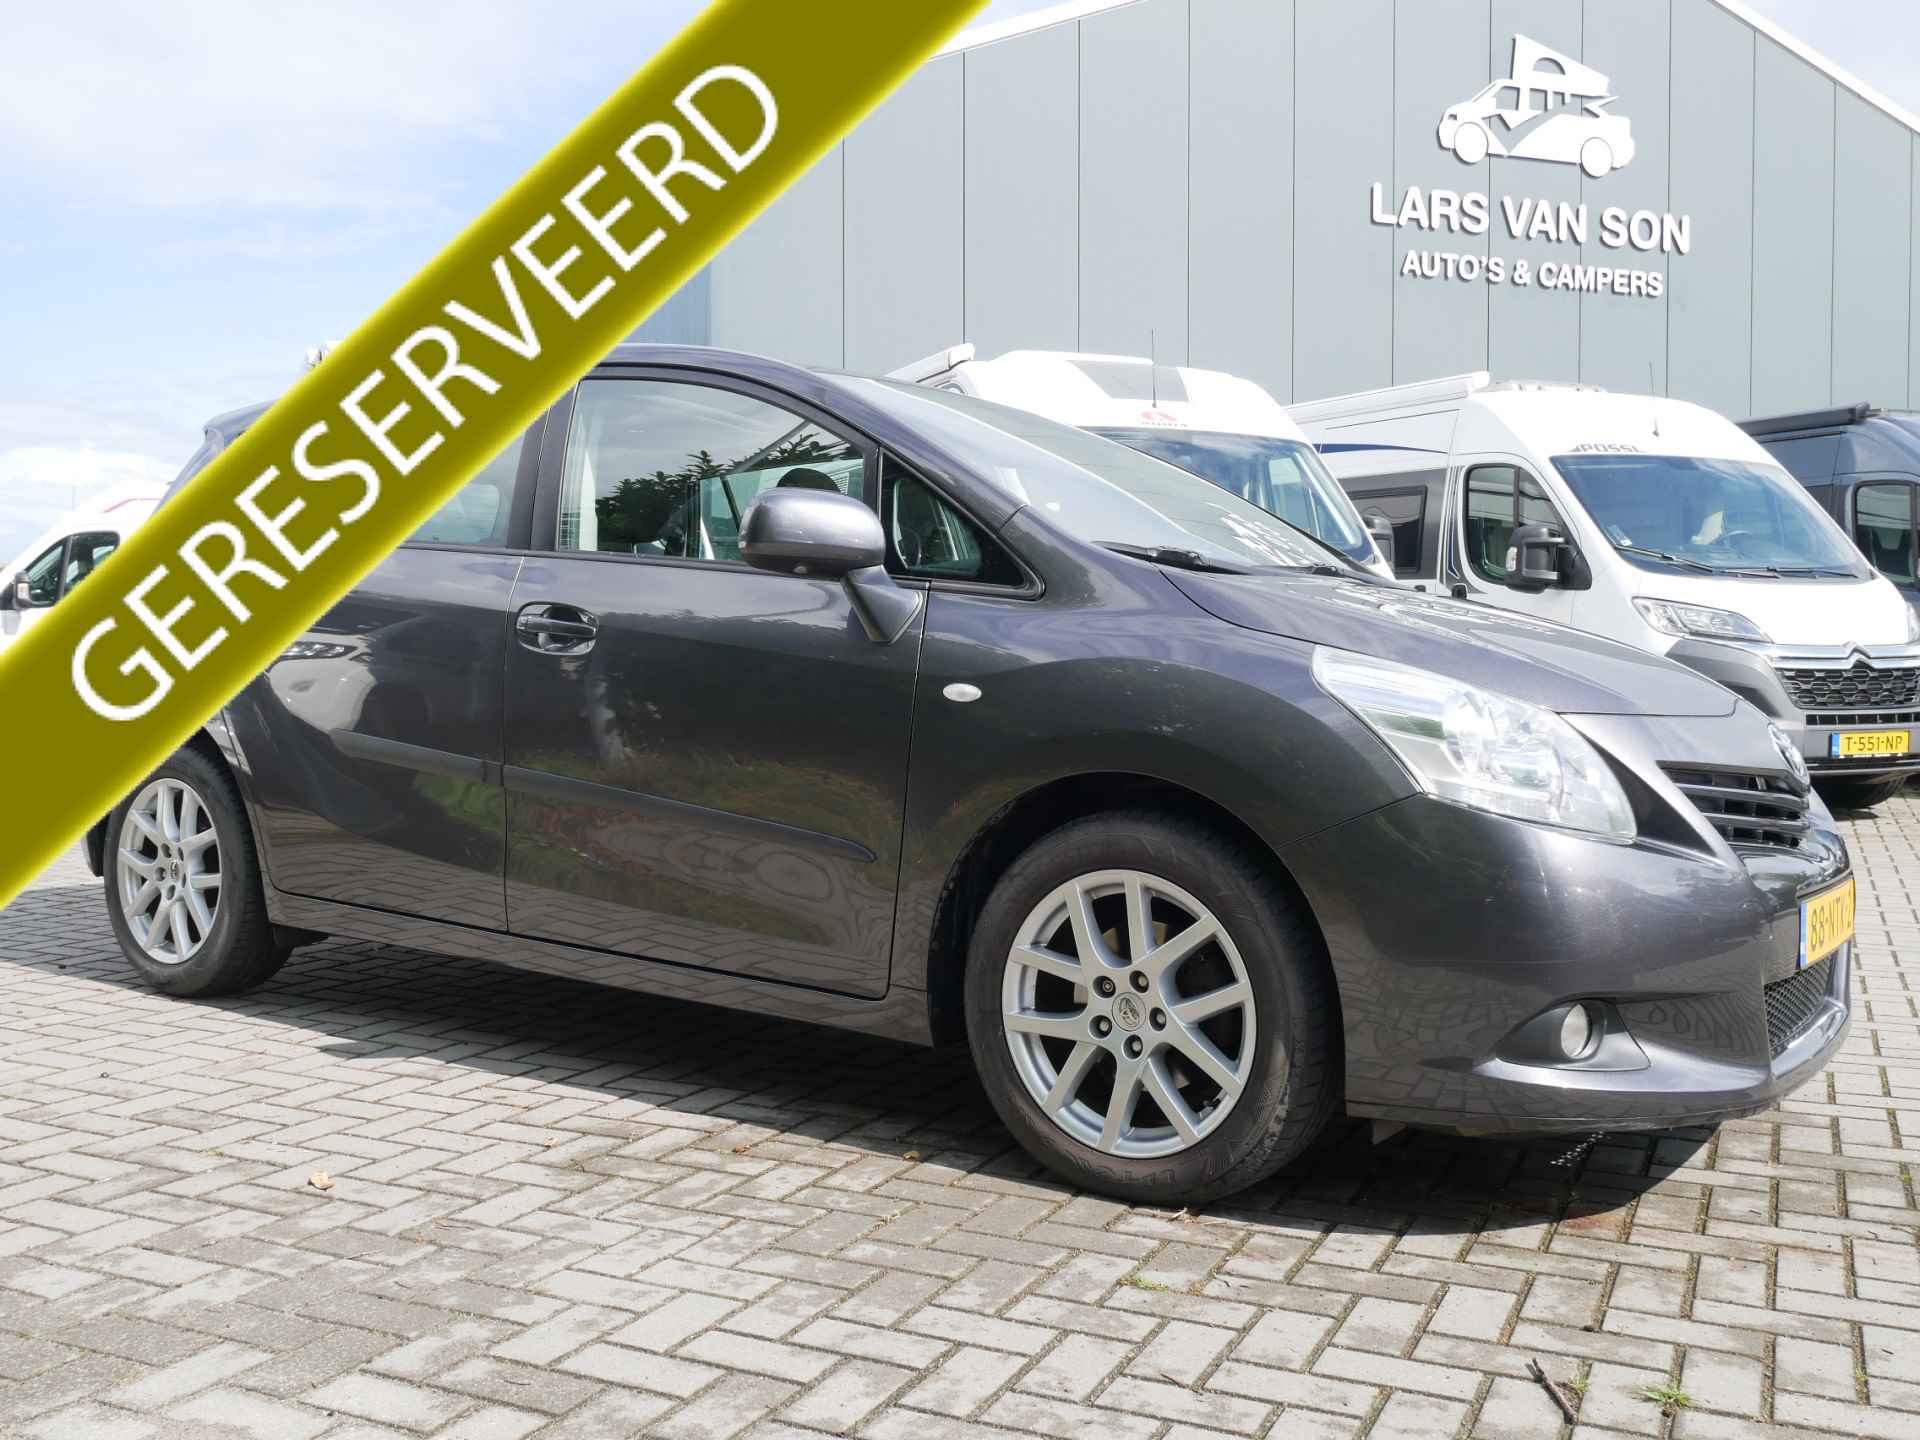 Toyota Verso 1.8 VVT-i Business Limited, Automaat, Zeer goede staat!!! - 1/26